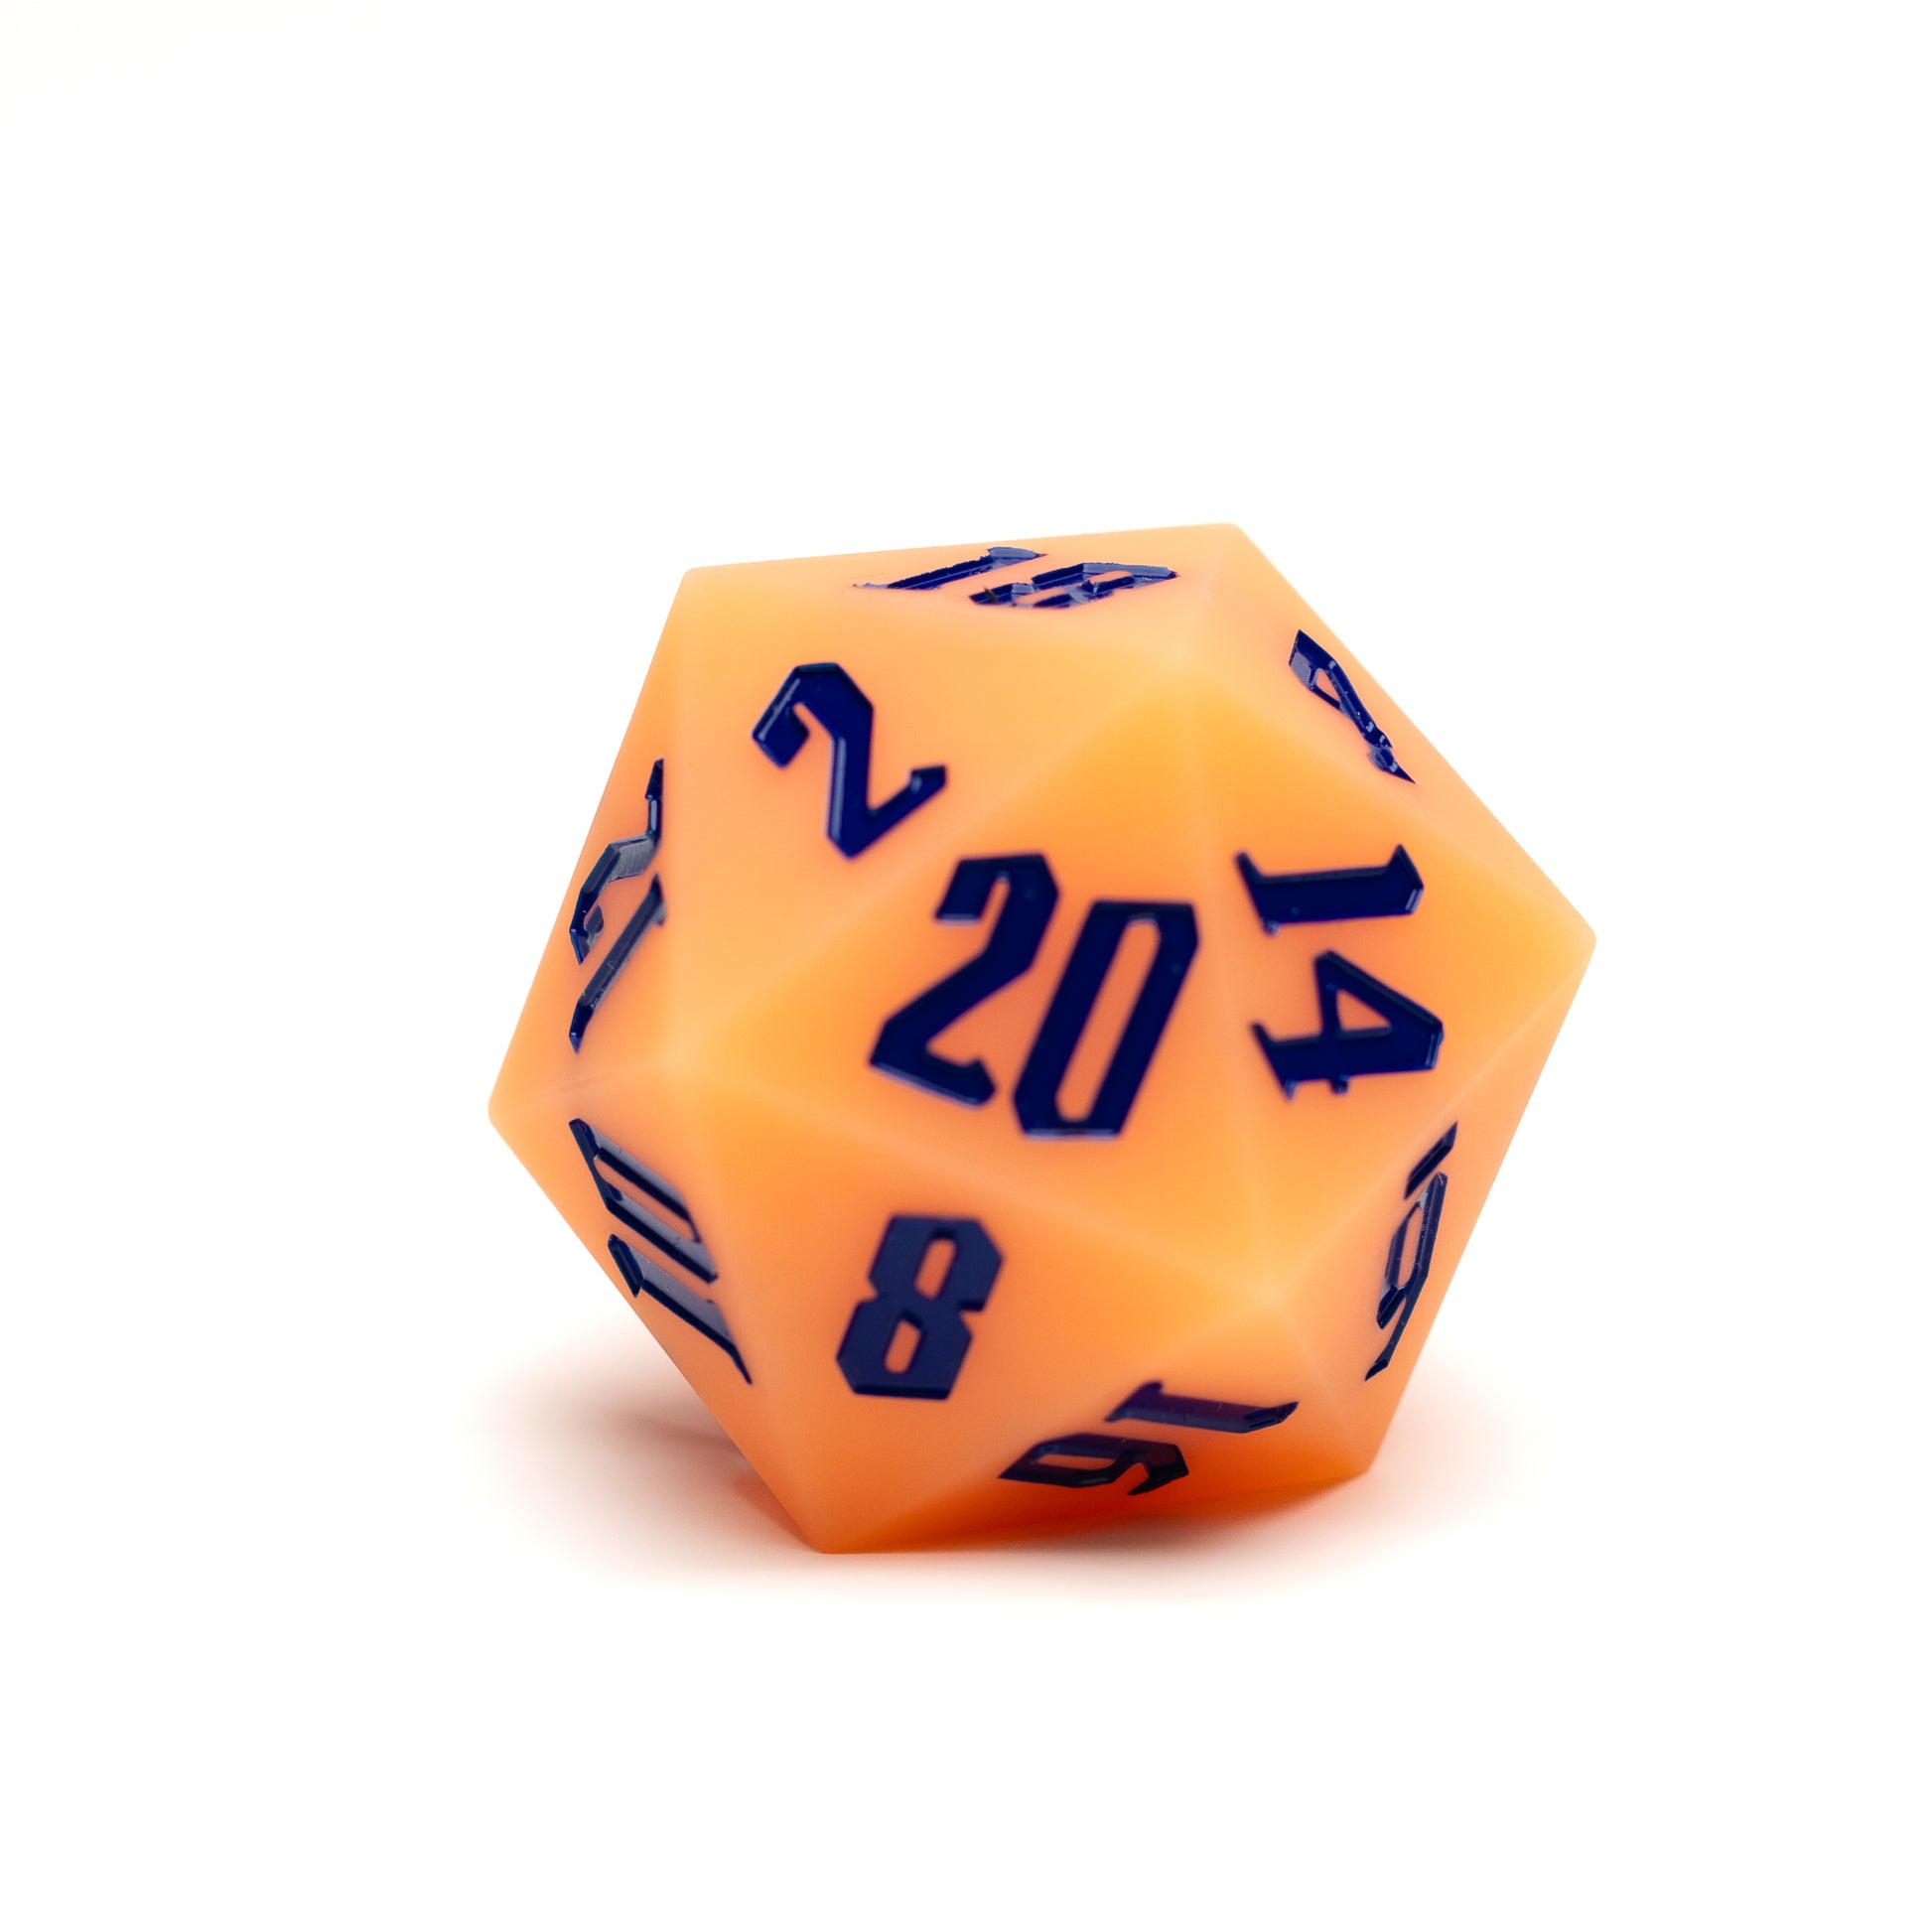 Roll Britannia Orange Bouncy Silicon 55mm D20 Glow in the Dark Dungeons and Dragons Dice